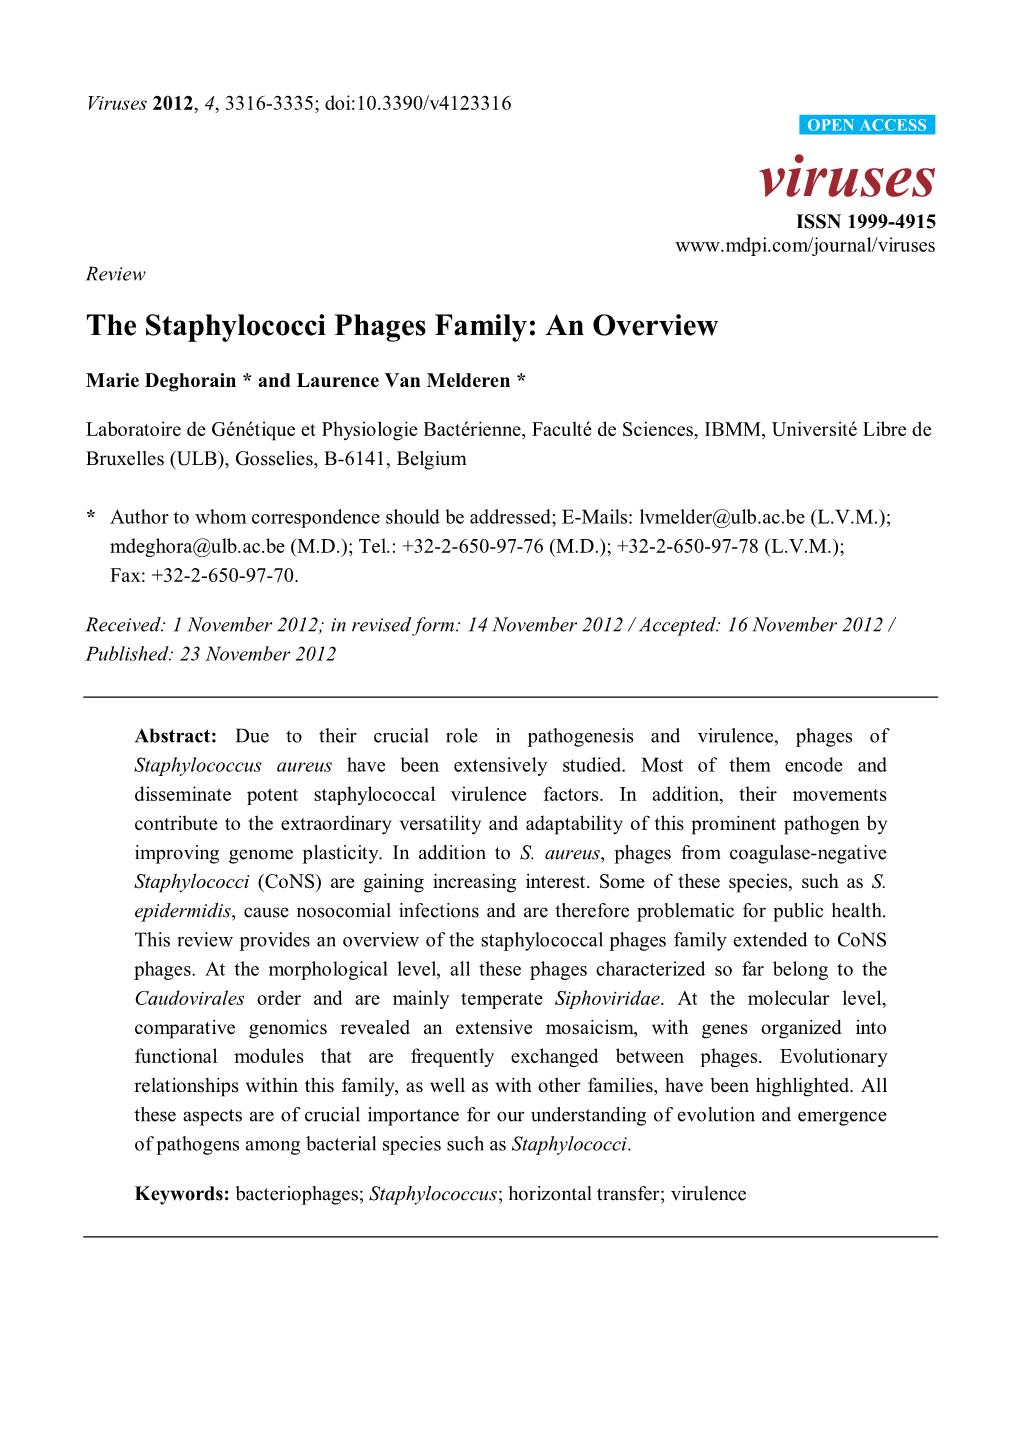 The Staphylococci Phages Family: an Overview